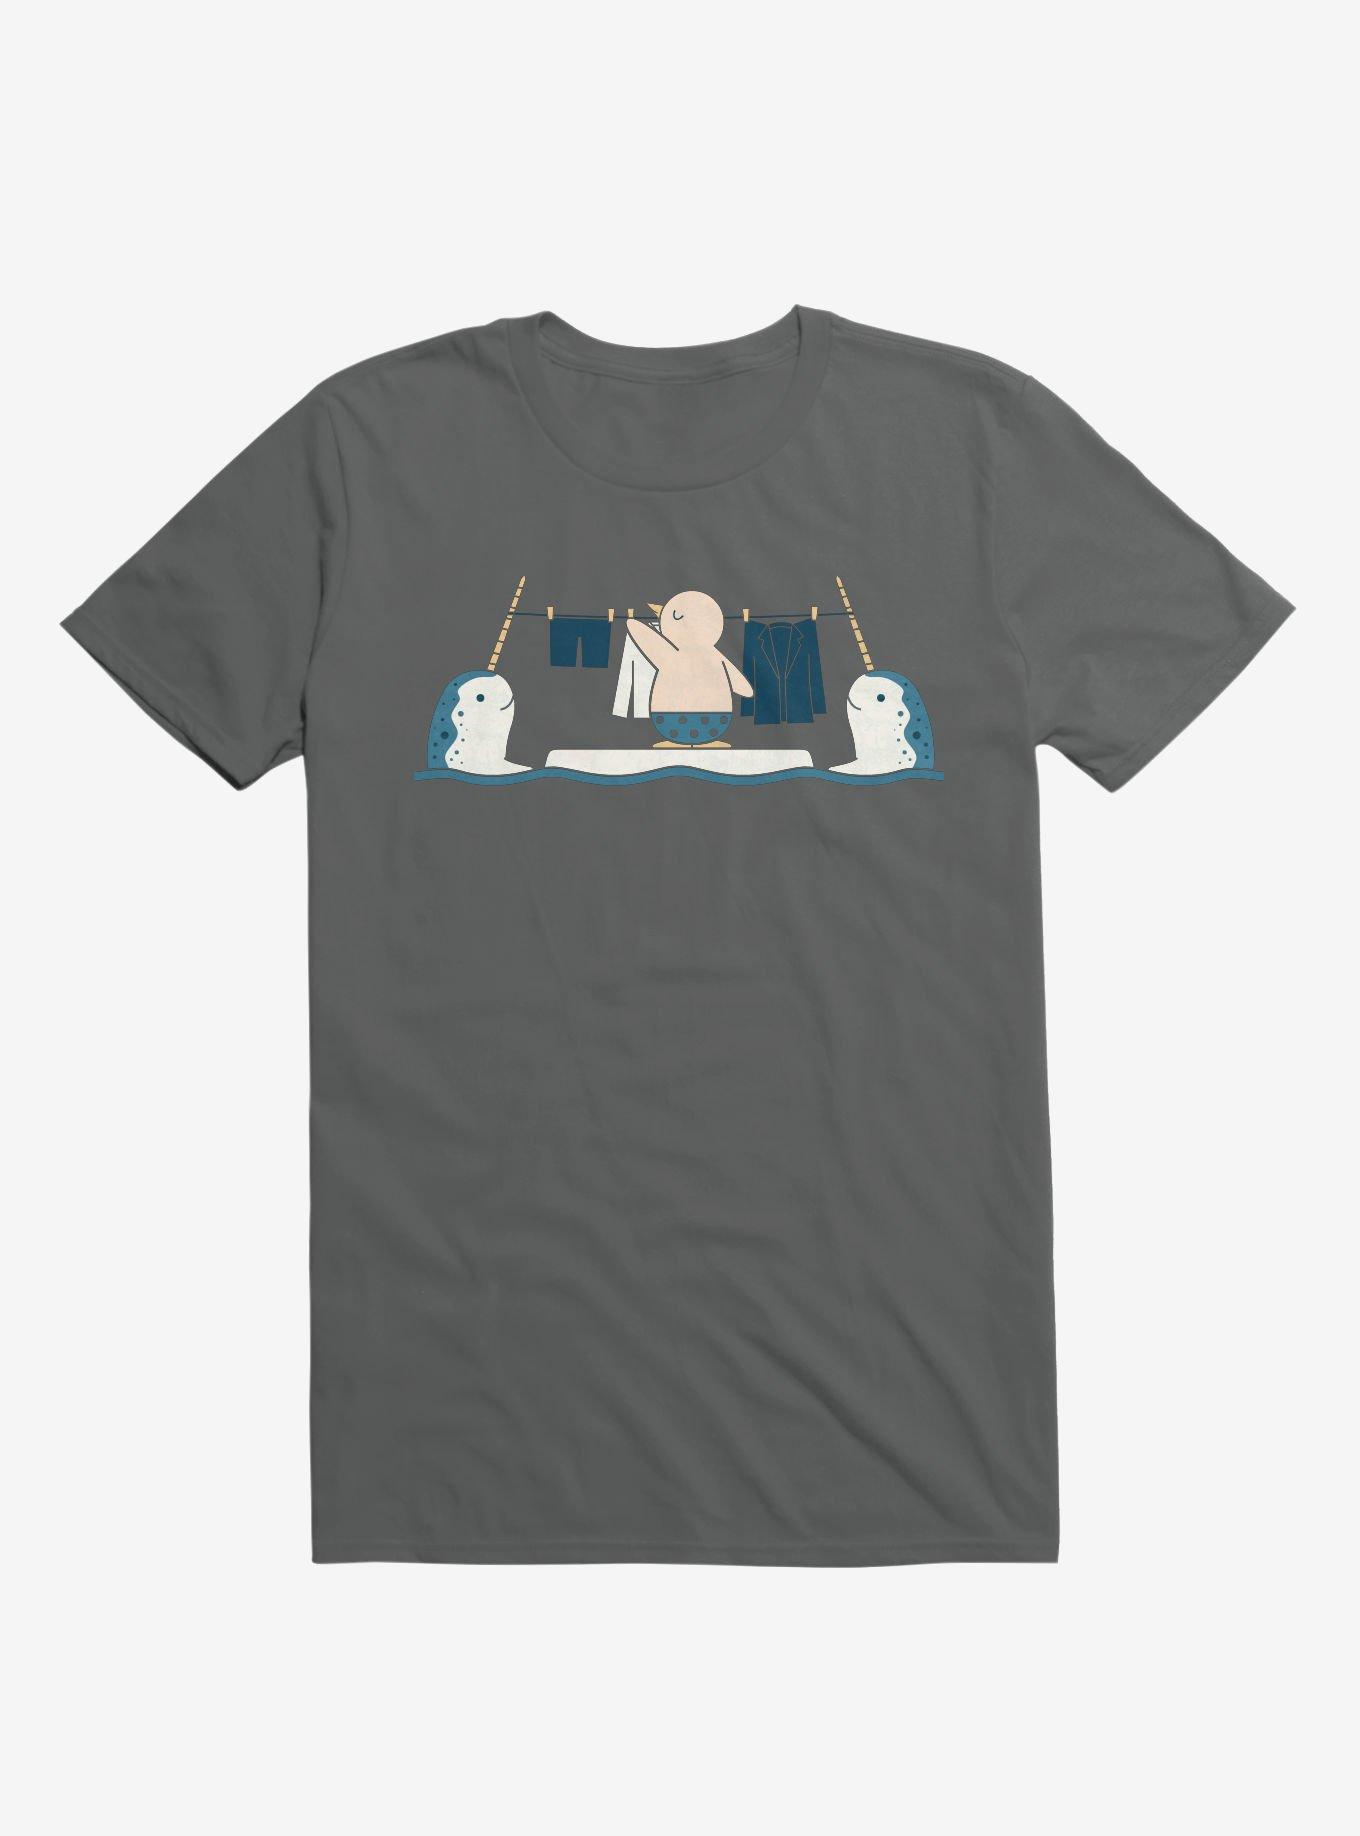 Penguin With Narwhals Laundry Day Charcoal Grey T-Shirt, CHARCOAL, hi-res